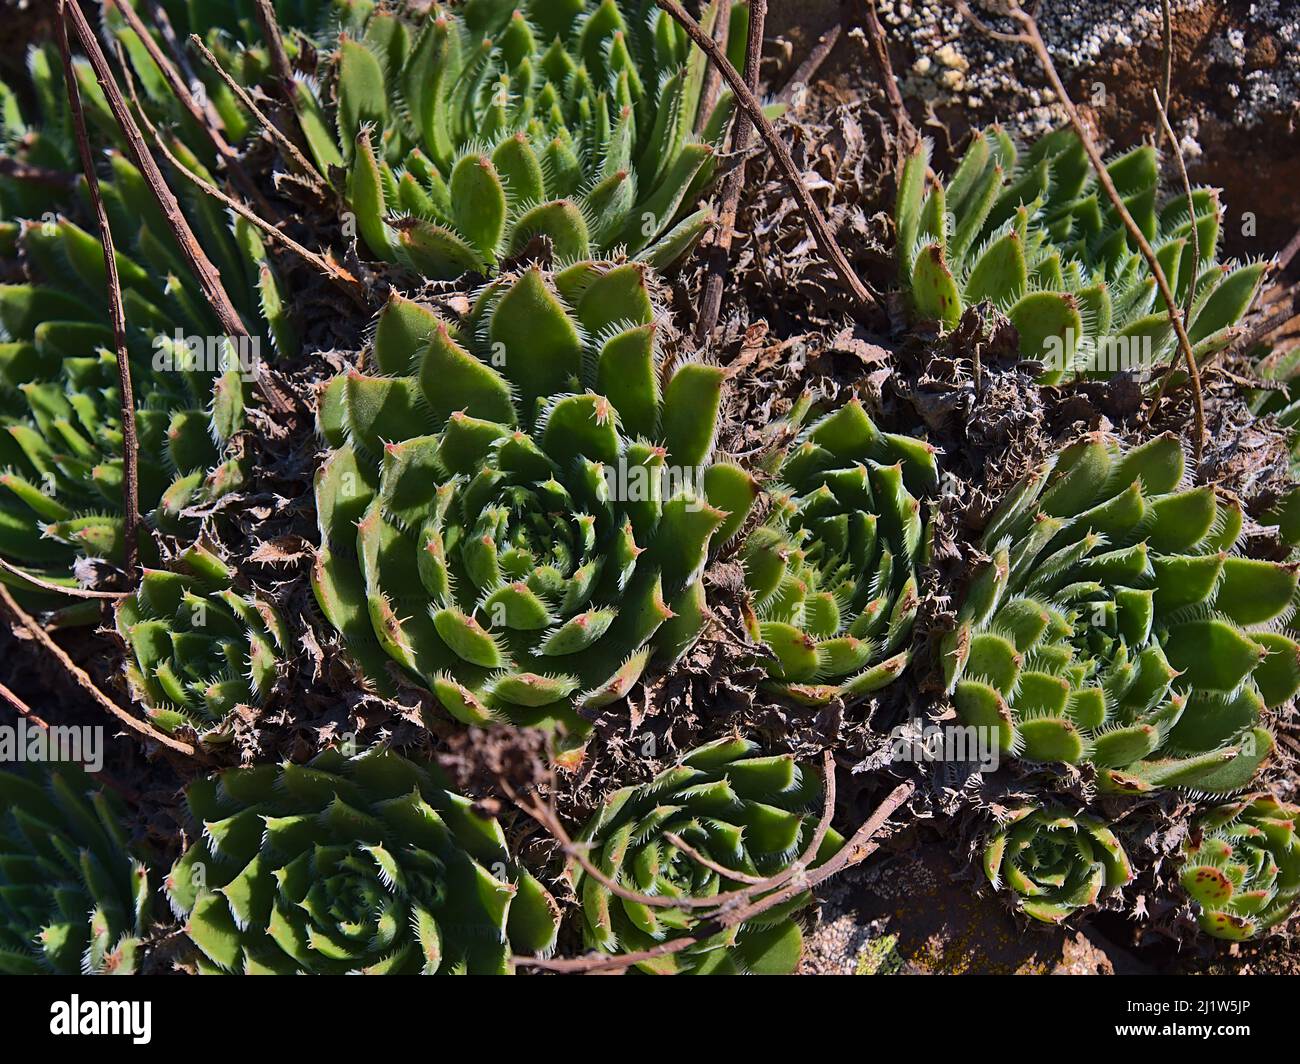 Closeup view of an Aeonium plant (tree houseleeks) with patterned green leaves growing between rocks in the mountains of Gran Canaria, Canary Islands. Stock Photo